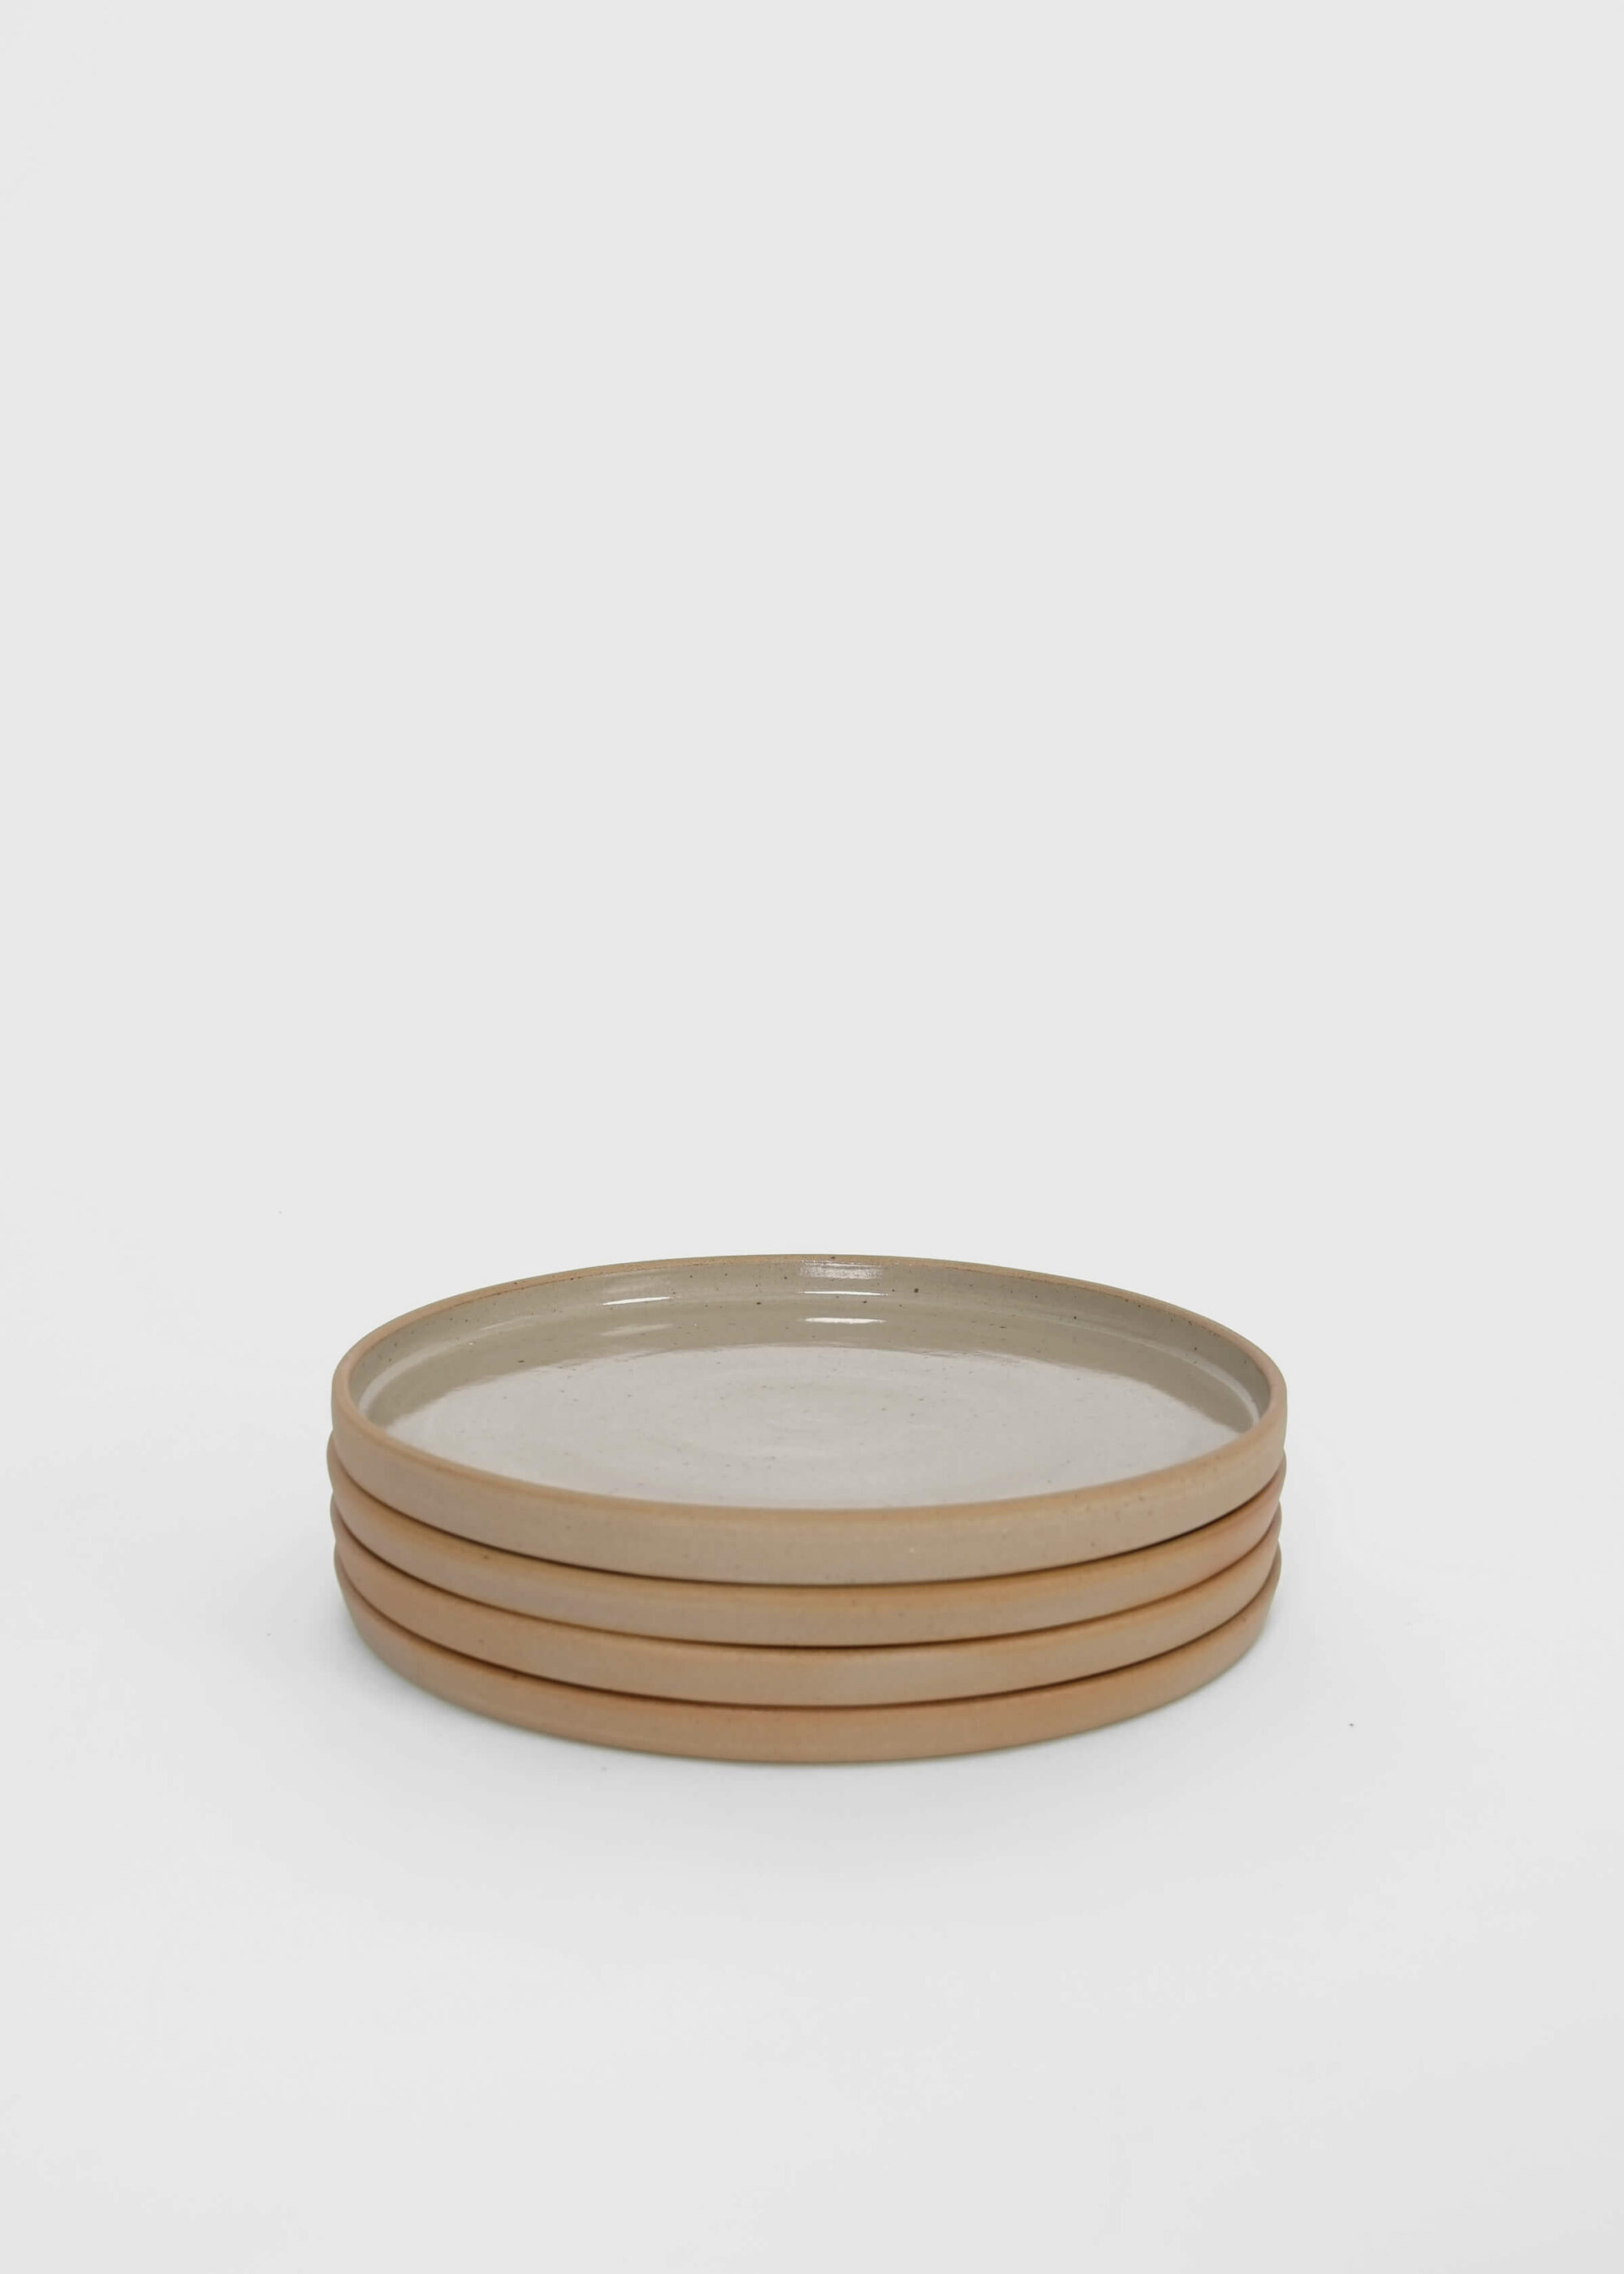 Product image for »Beuys« High-Rim Gourmet Plate 22 cm